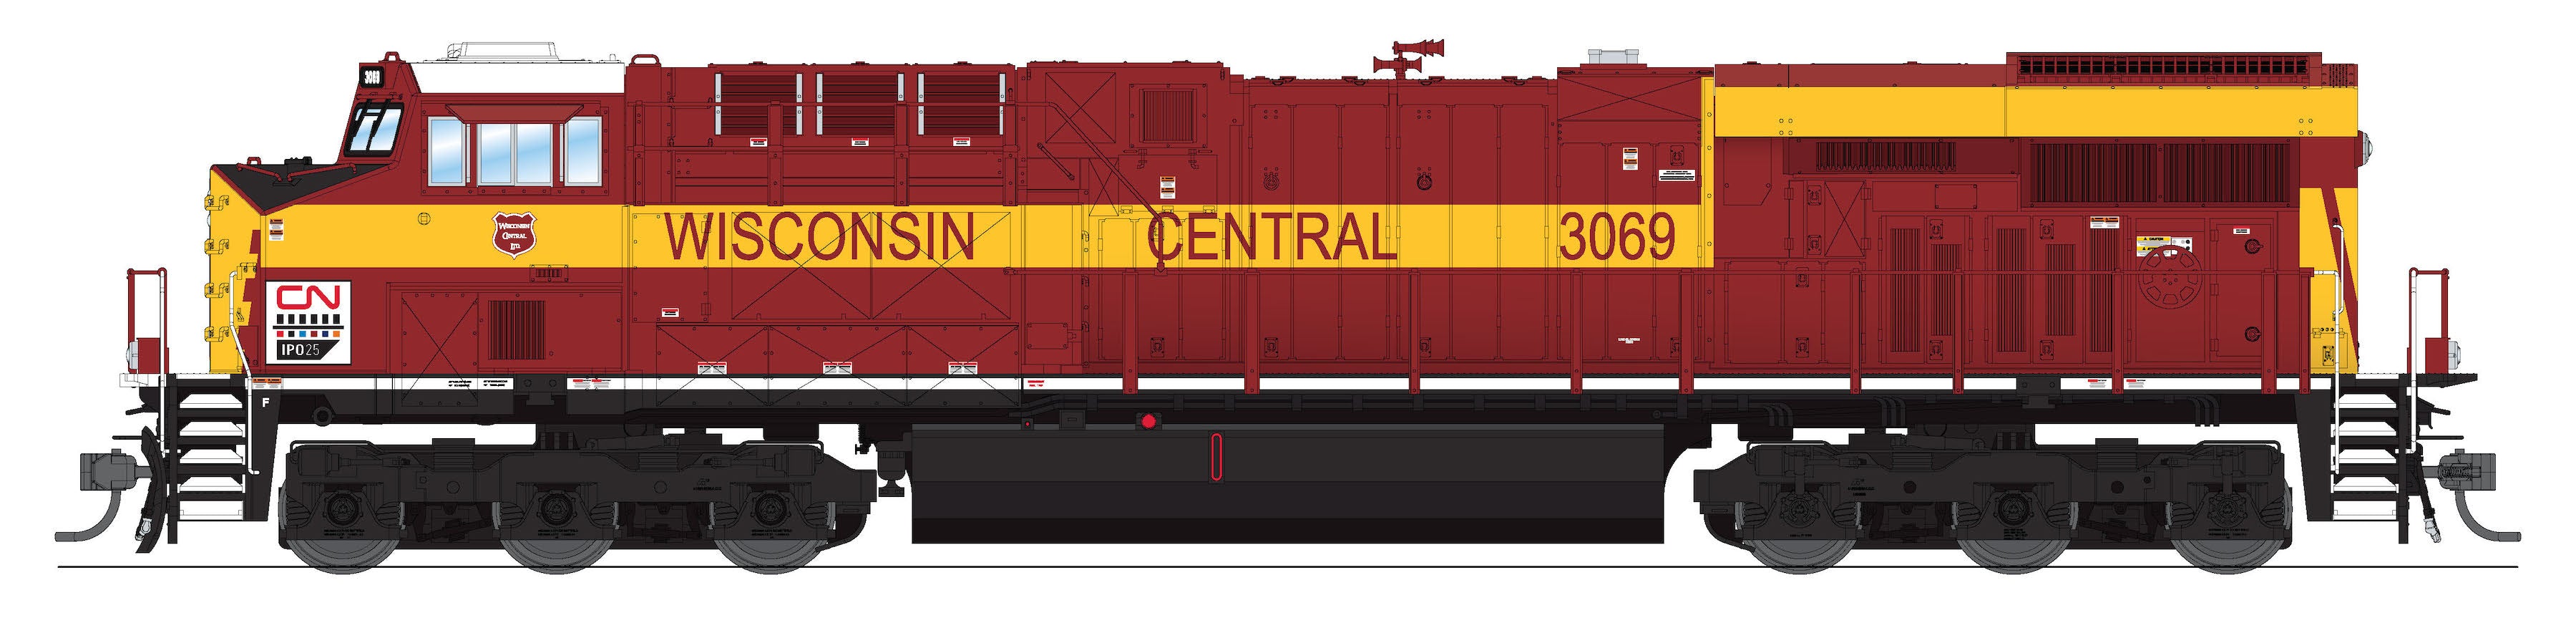 8554 GE ES44AC, CN #3069, Wisconsin Central Heritage Paint, No-Sound / DCC-Ready, HO